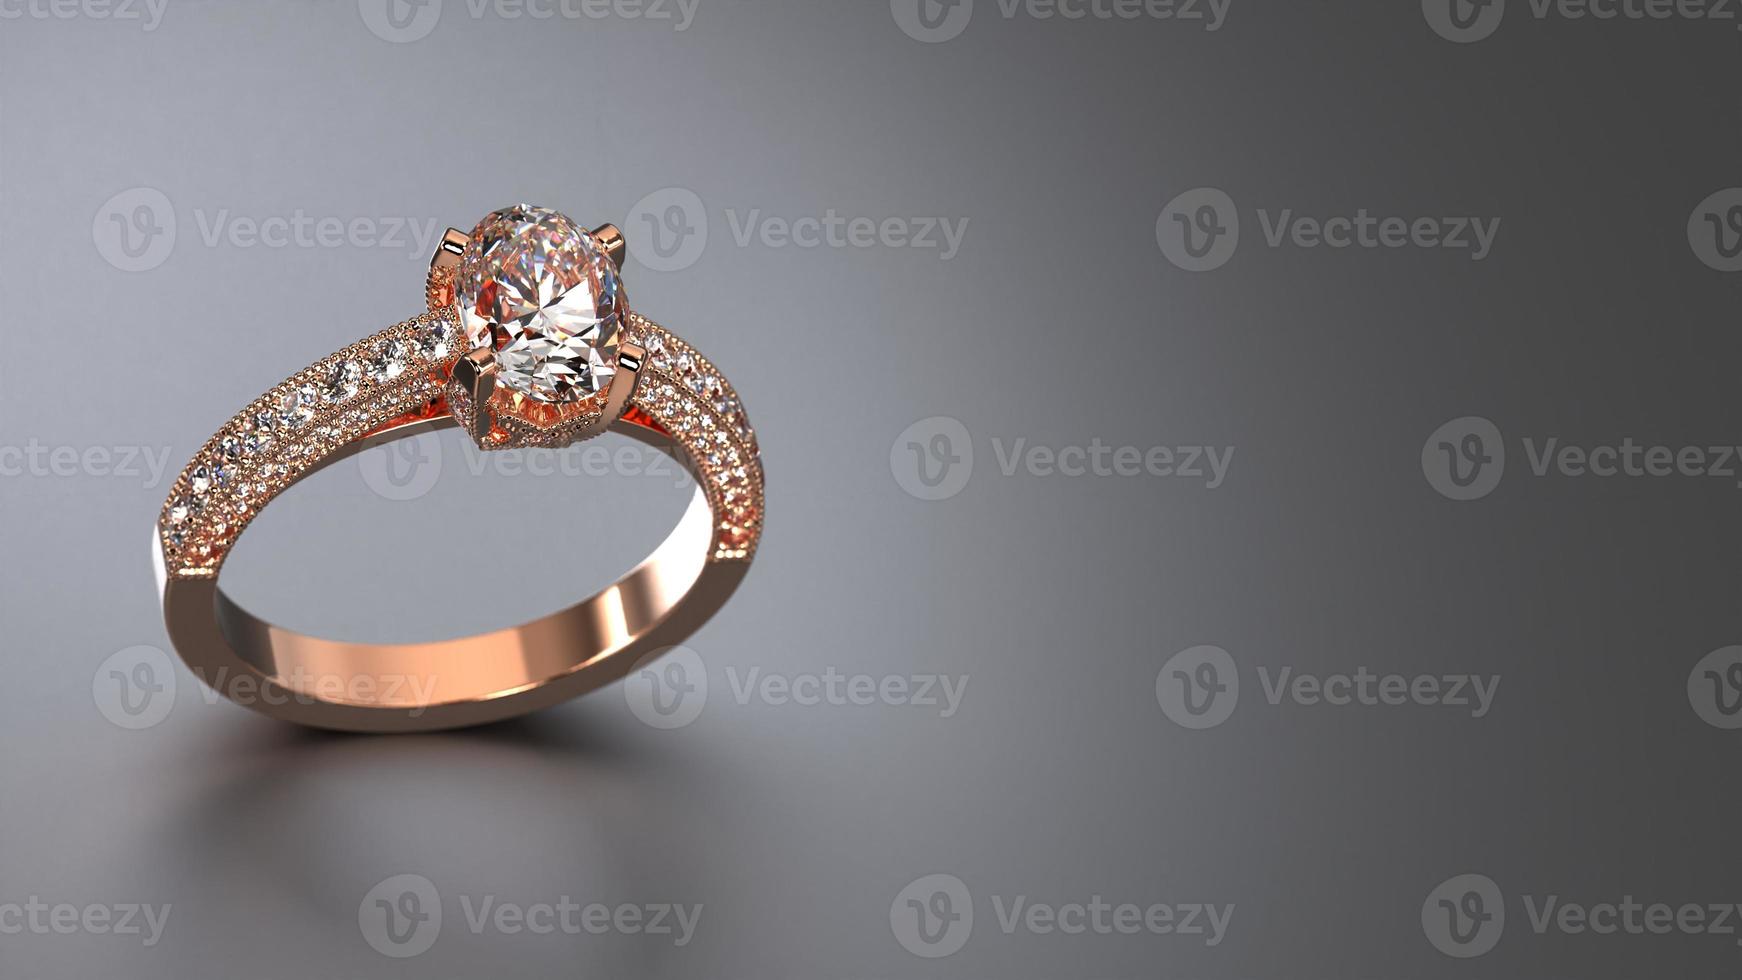 oval rose gold solitaire ring photo